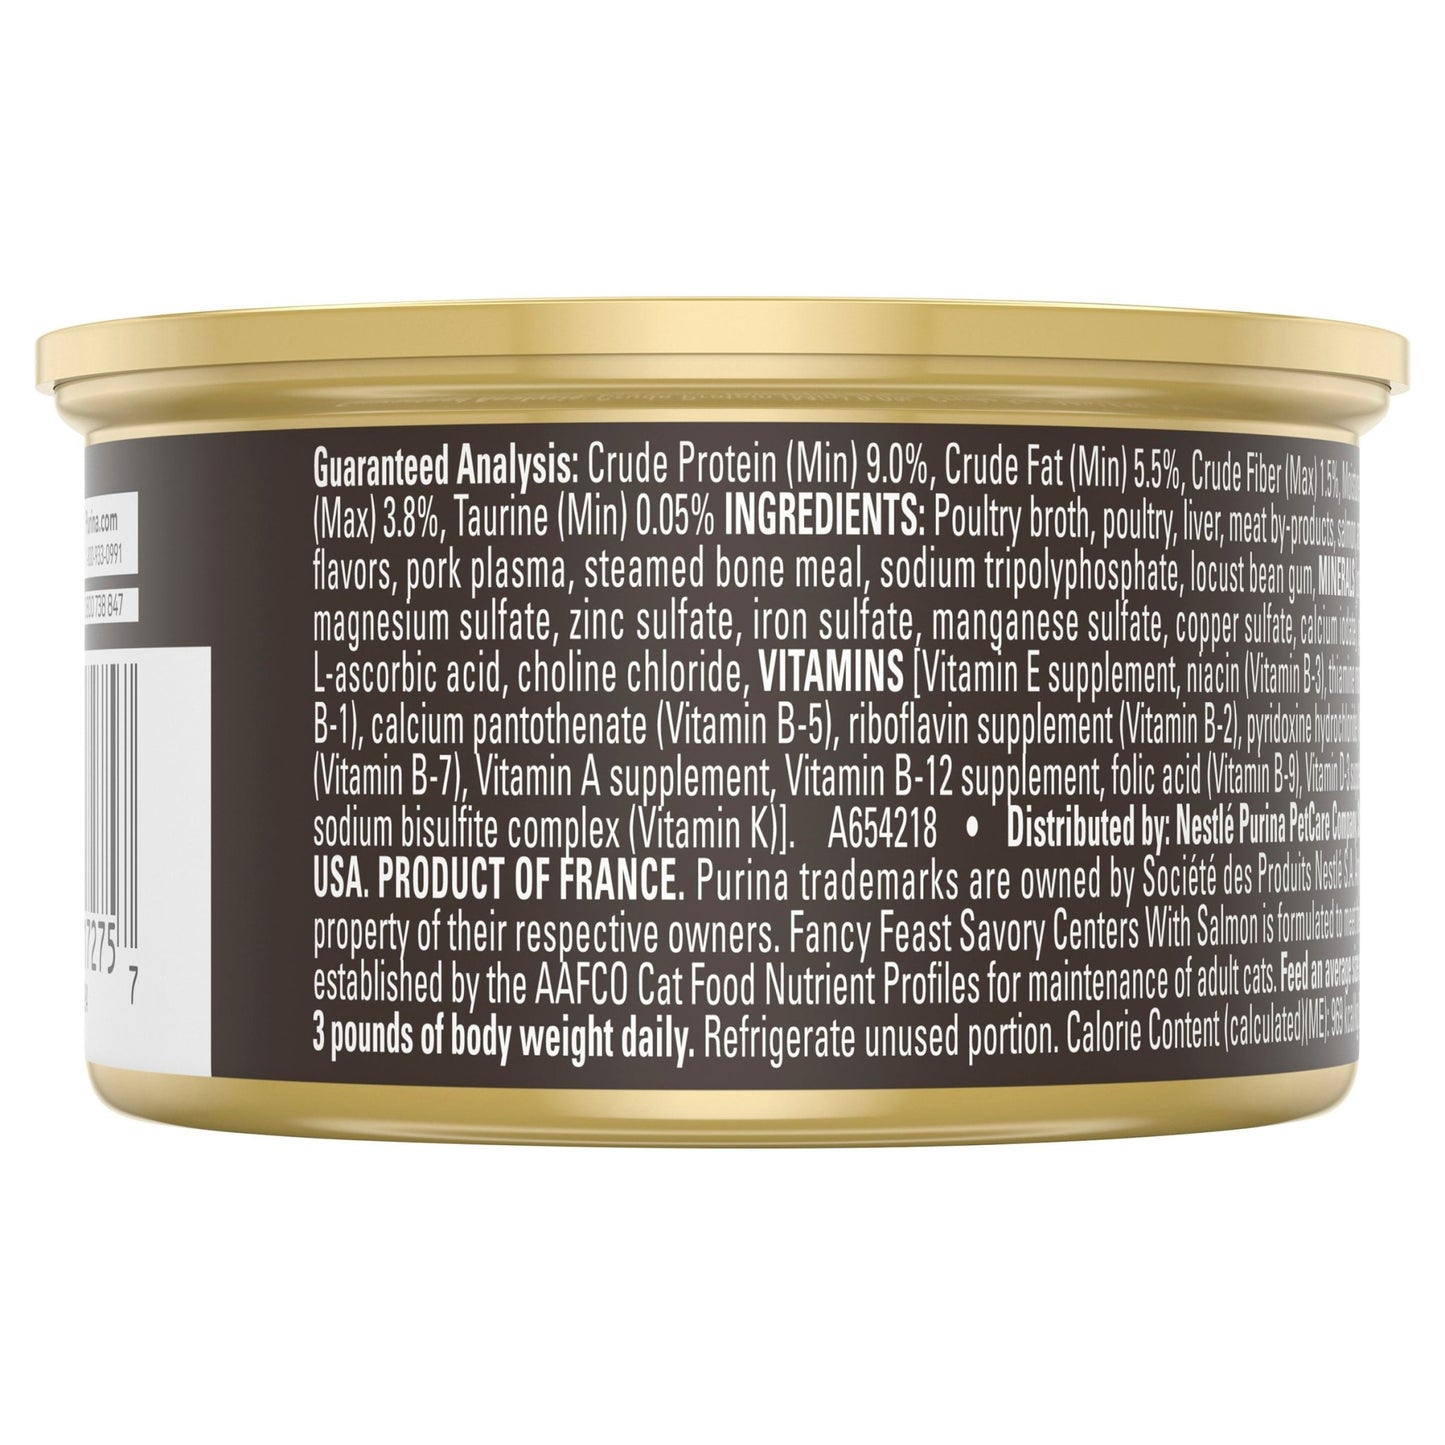 Fancy Feast Savory Centers Pate With Salmon and a Gourmet Gravy Center 24x85g - Woonona Petfood & Produce